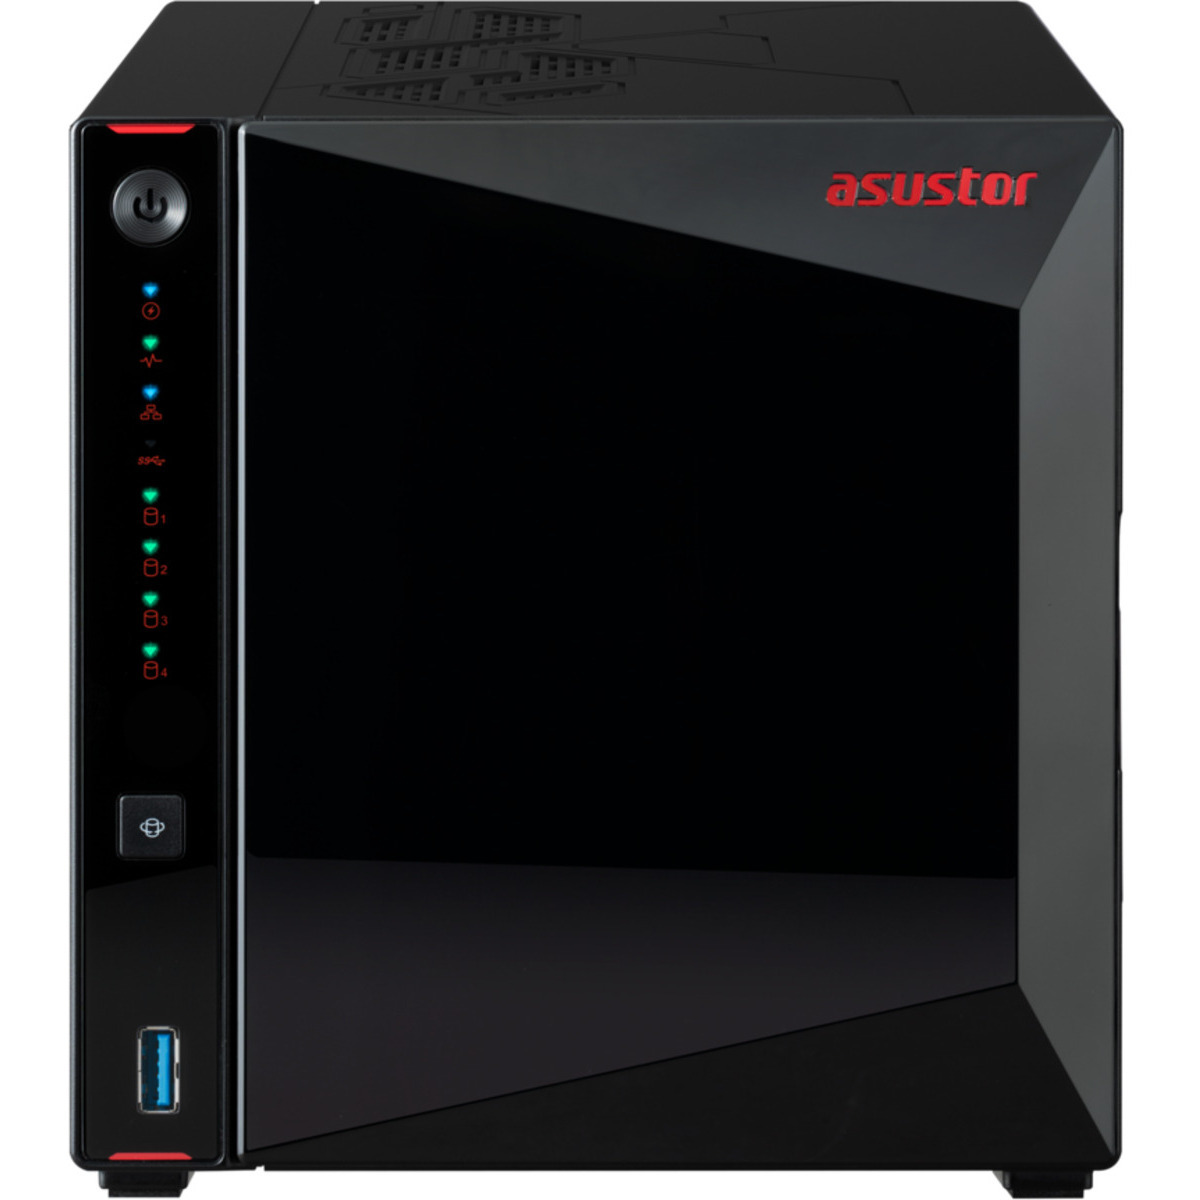 buy $1833 ASUSTOR Nimbustor 4 Gen2 AS5404T 48tb Desktop NAS - Network Attached Storage Device 4x12000gb Seagate IronWolf Pro ST12000NT001 3.5 7200rpm SATA 6Gb/s HDD NAS Class Drives Installed - Burn-In Tested - FREE RAM UPGRADE - nas headquarters buy network attached storage server device das new raid-5 free shipping simply usa Nimbustor 4 Gen2 AS5404T